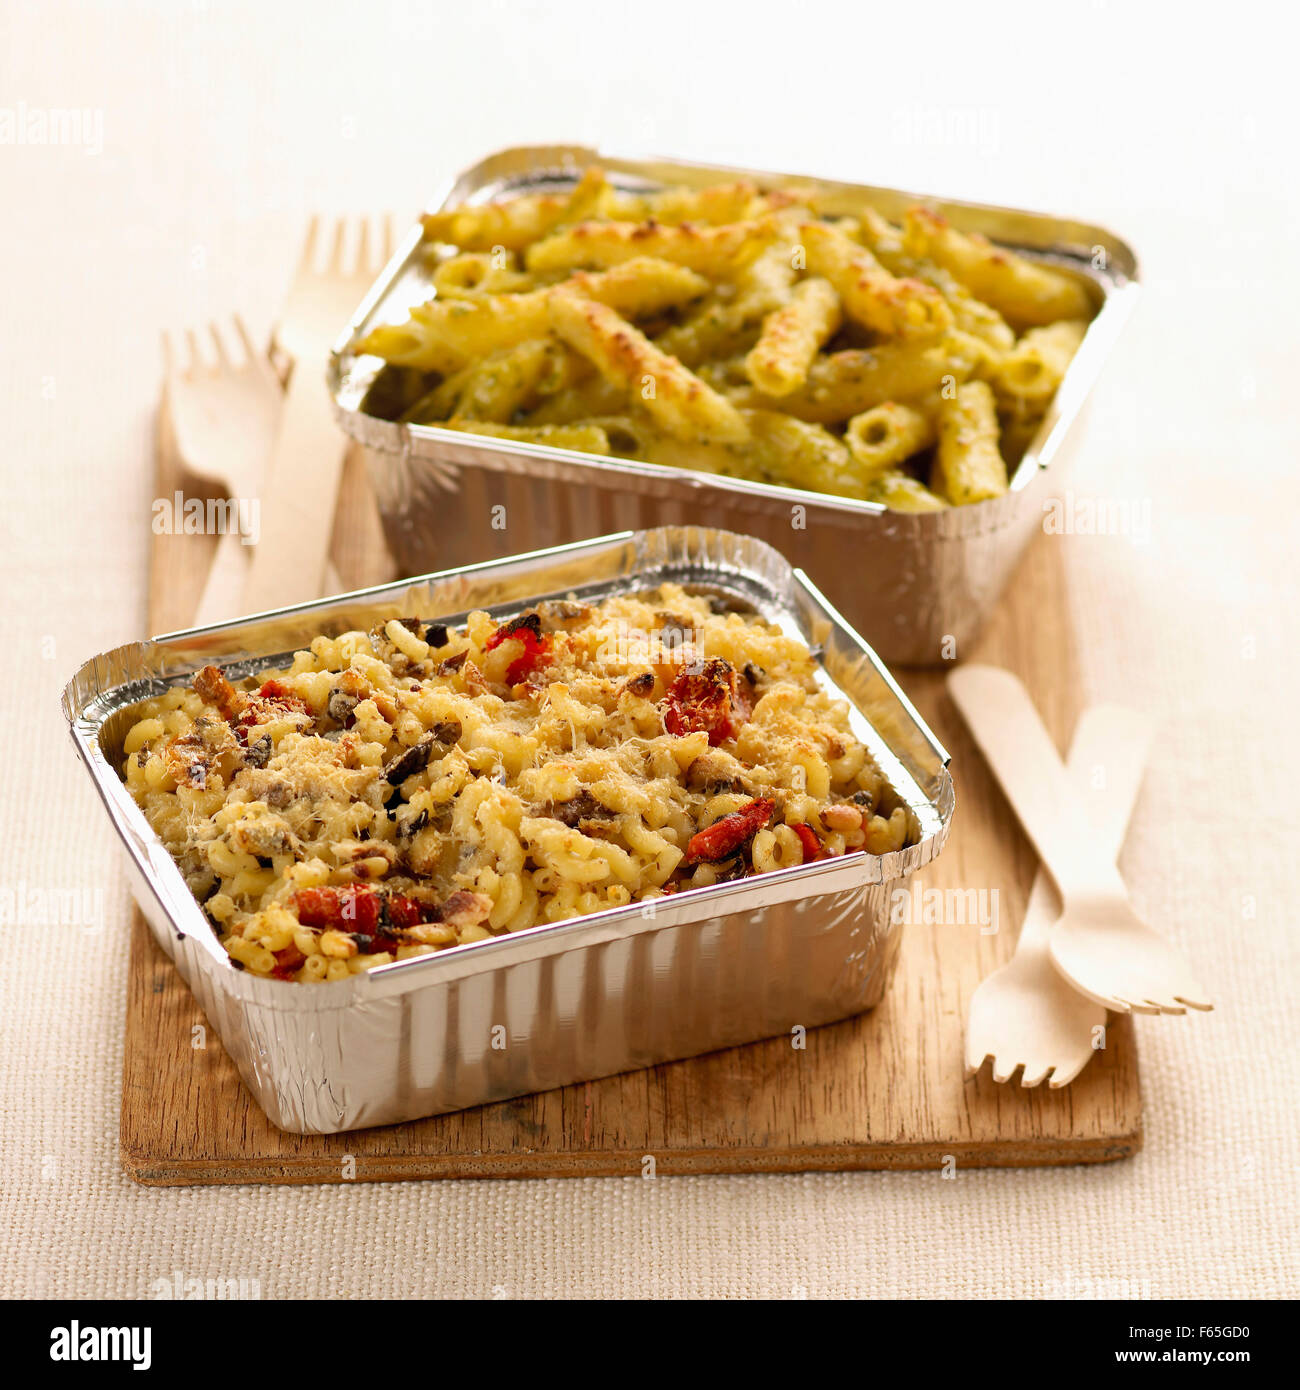 pasta shell bake and penne pasta bake (topic: bakes) Stock Photo